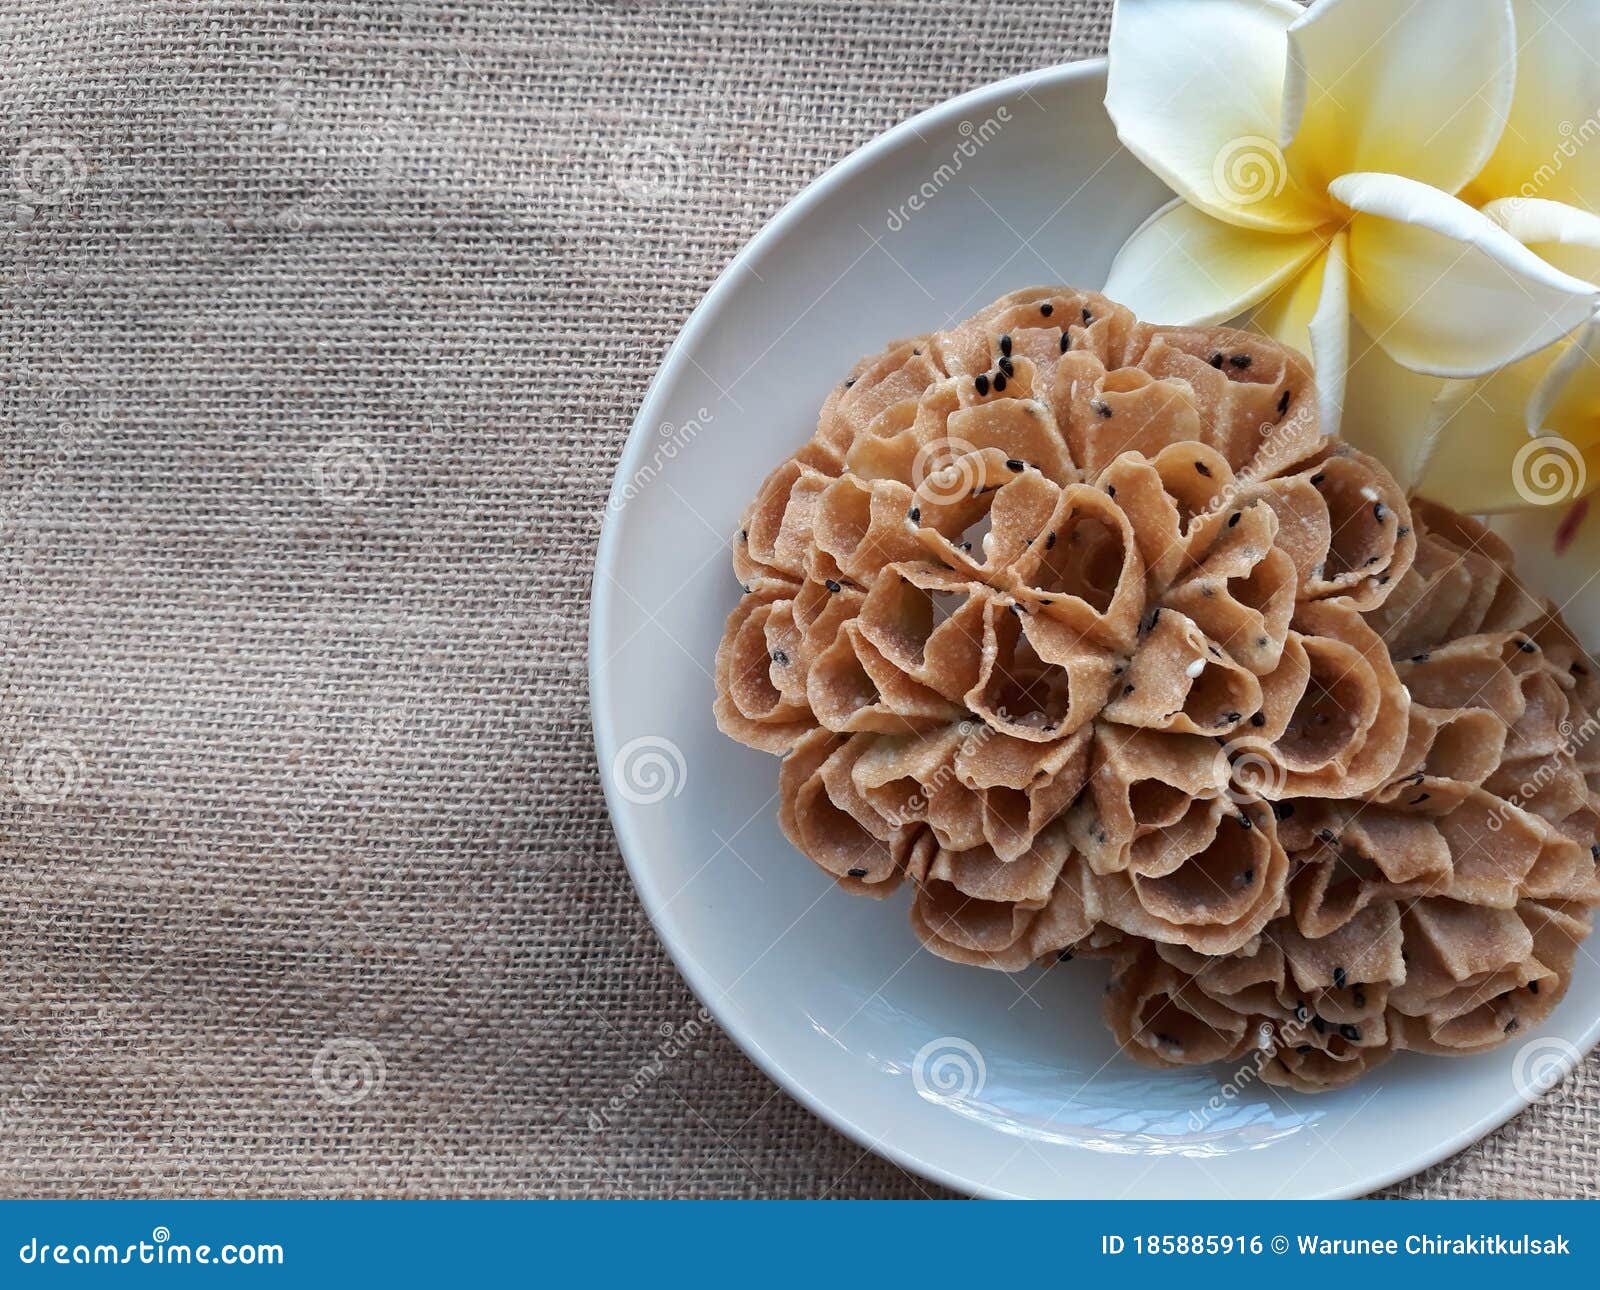 texture background of thai snacks name "kanom dork jork" on a dish with flowers. space for text